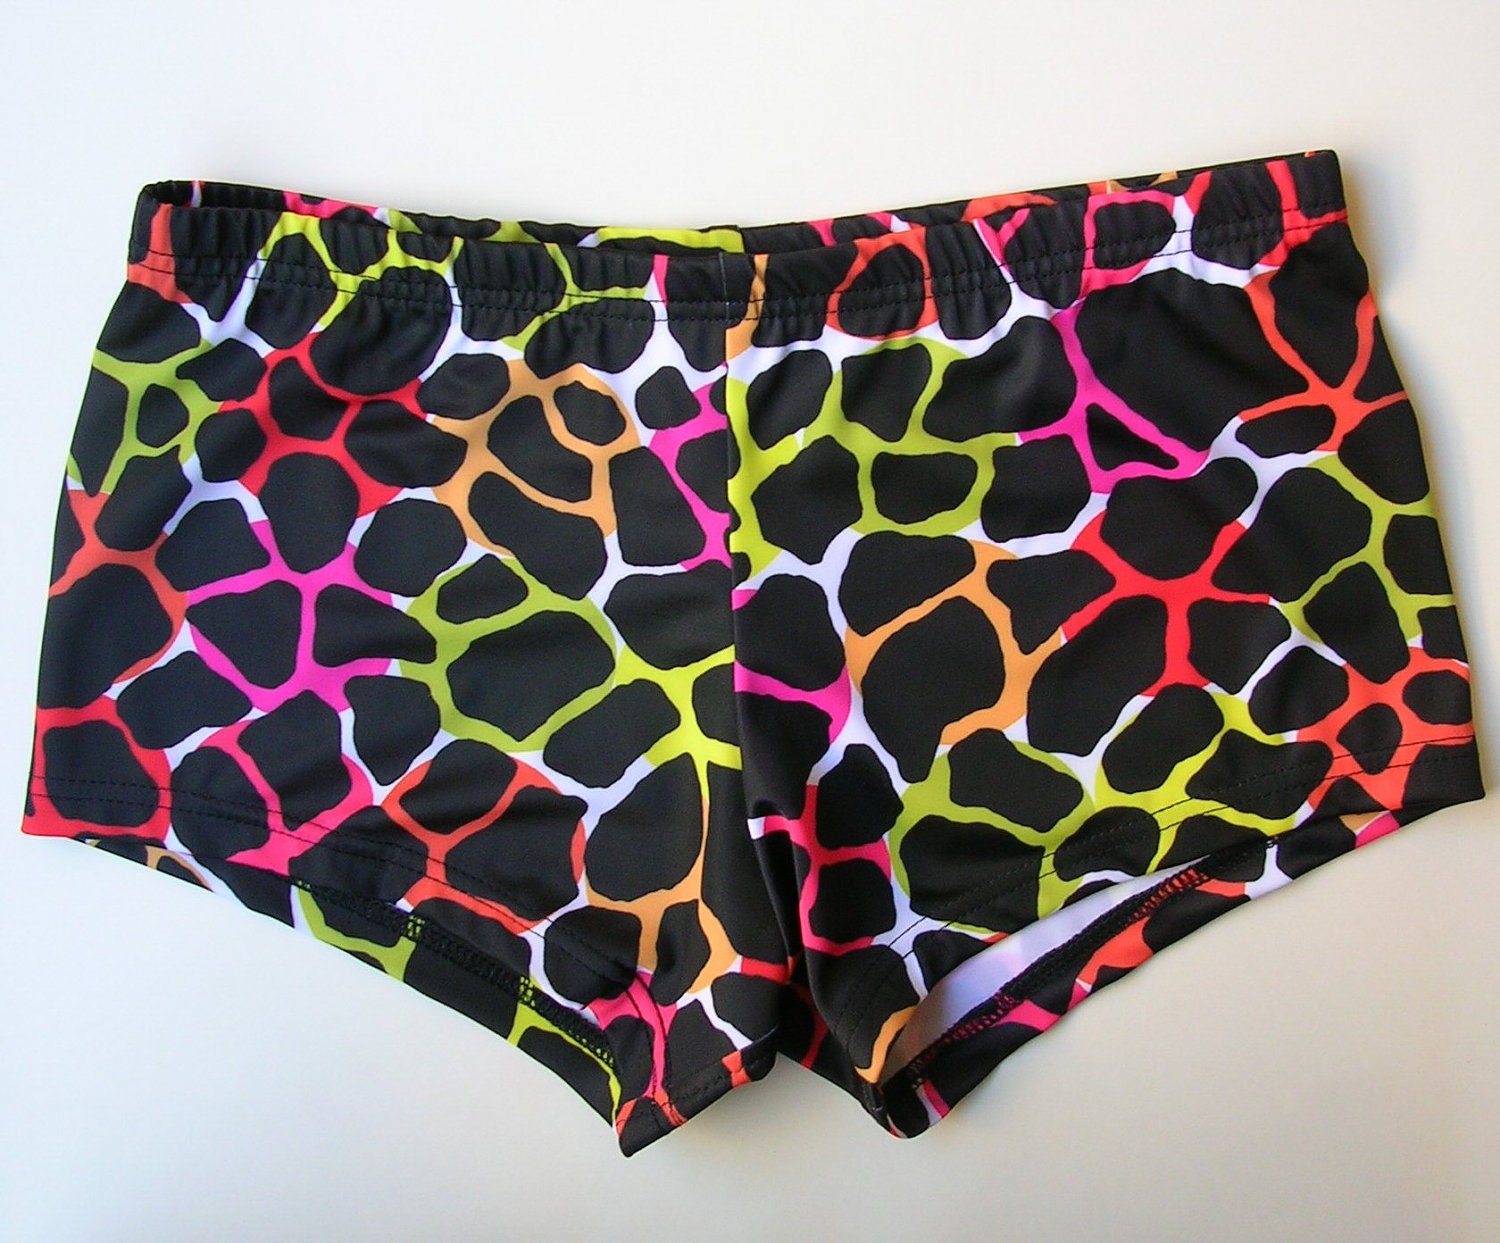 Mens Low Rise Square Cut Swimsuit in Wired Giraffe Print - Etsy